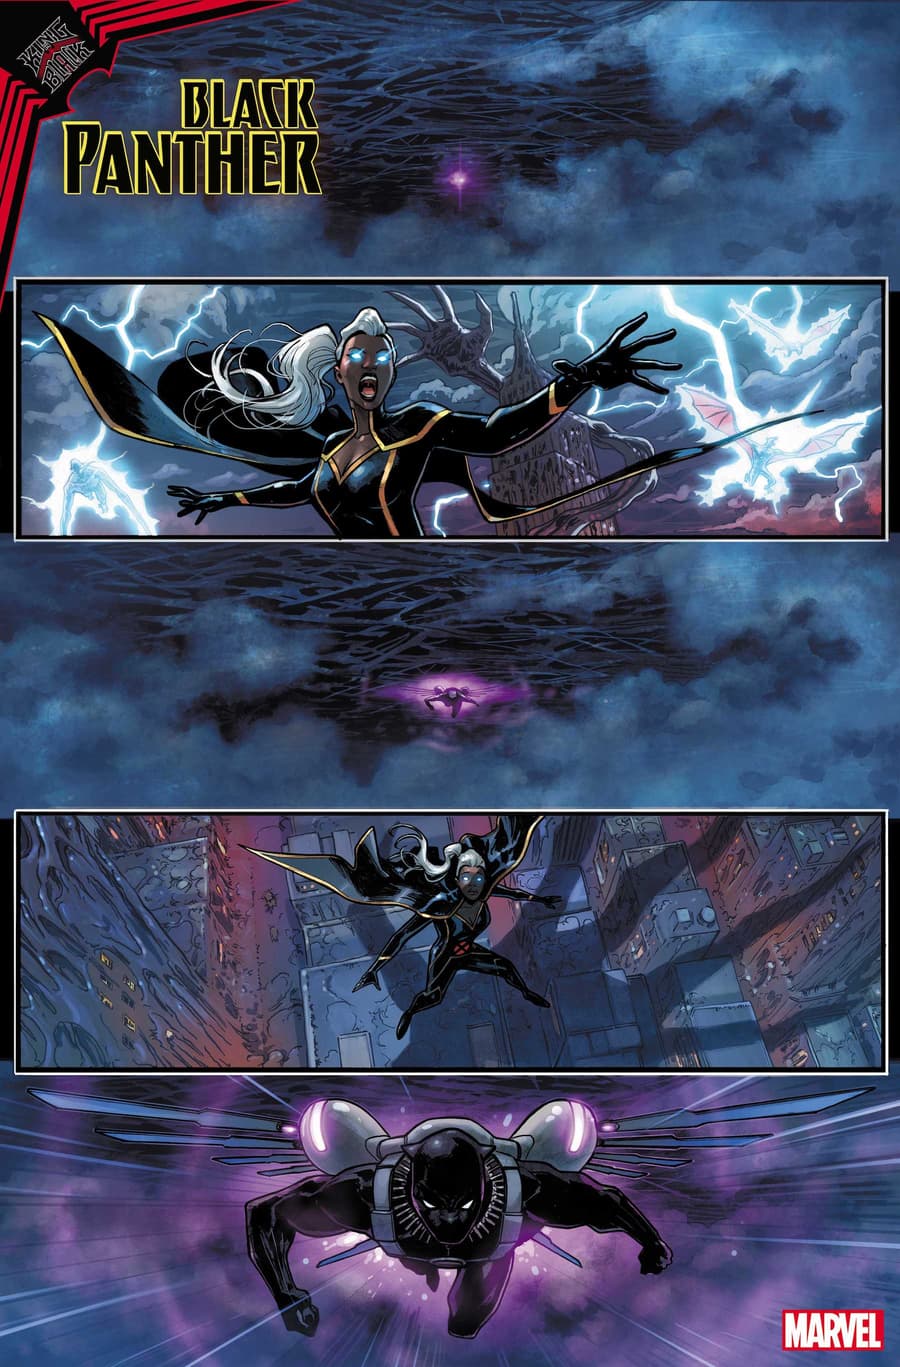 KING IN BLACK: BLACK PANTHER #1 preview art by Germán Peralta with colors by Jesus Aburtov